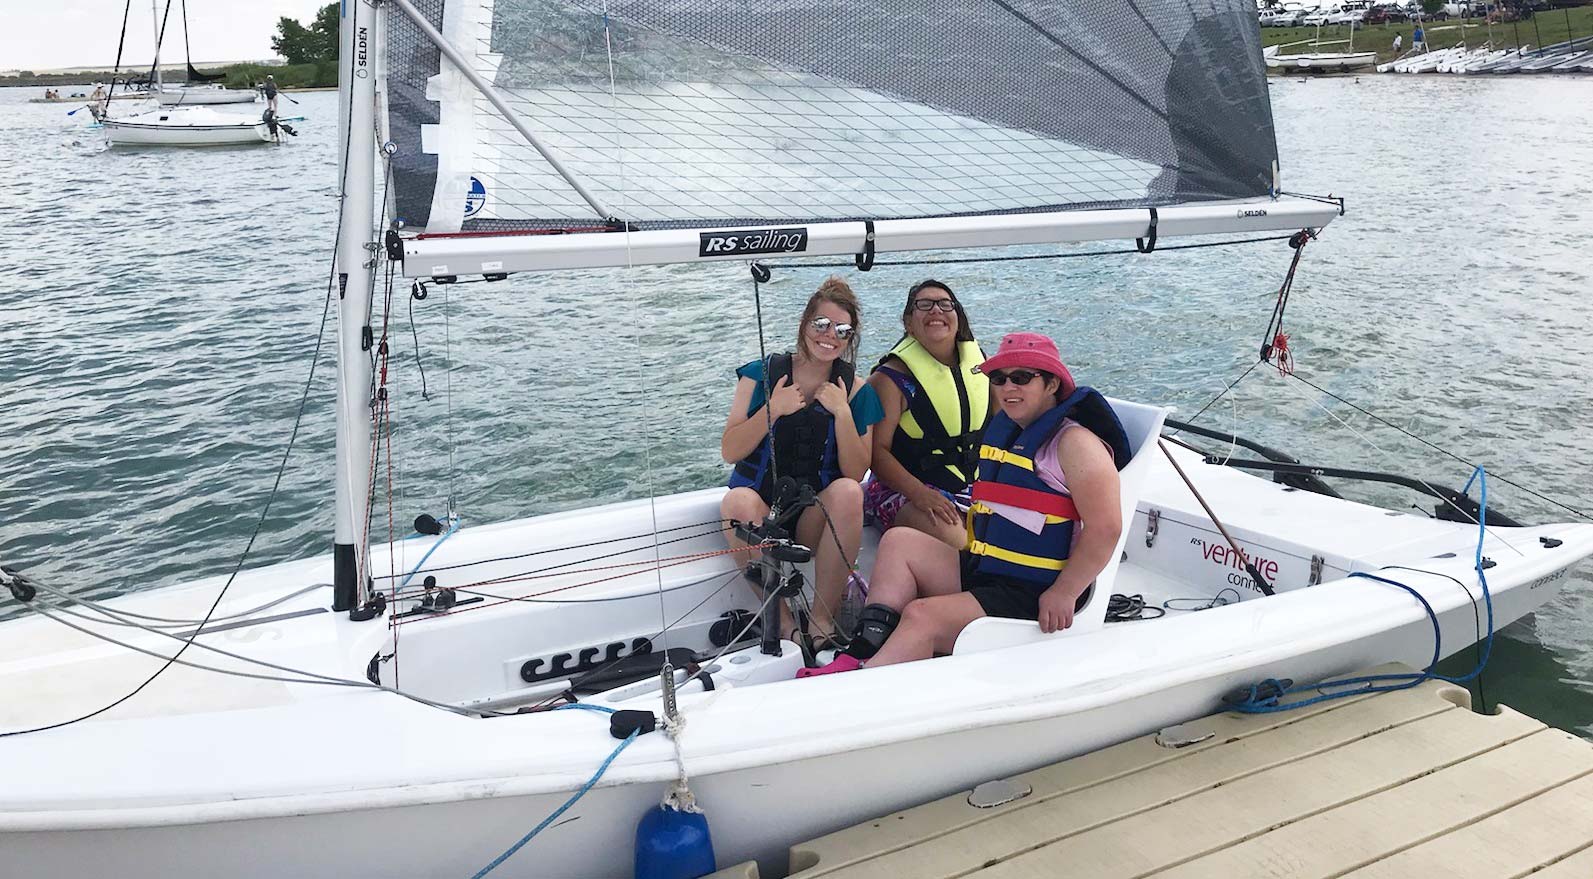 Adults with disabilities outdoors sailing on a small boat.